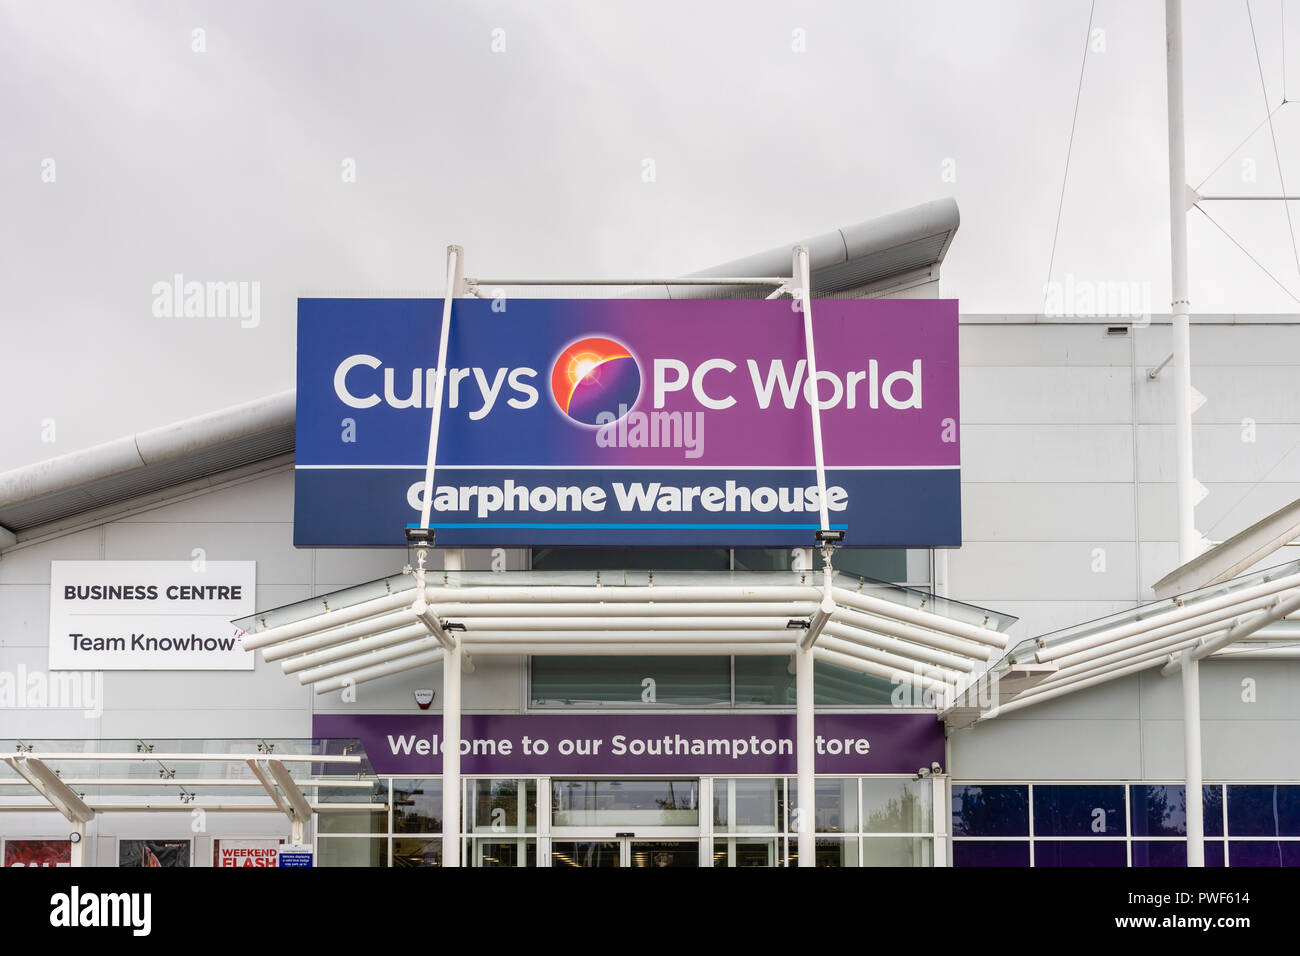 Facade of a Currys PC World store in Southampton, England, UK Stock Photo